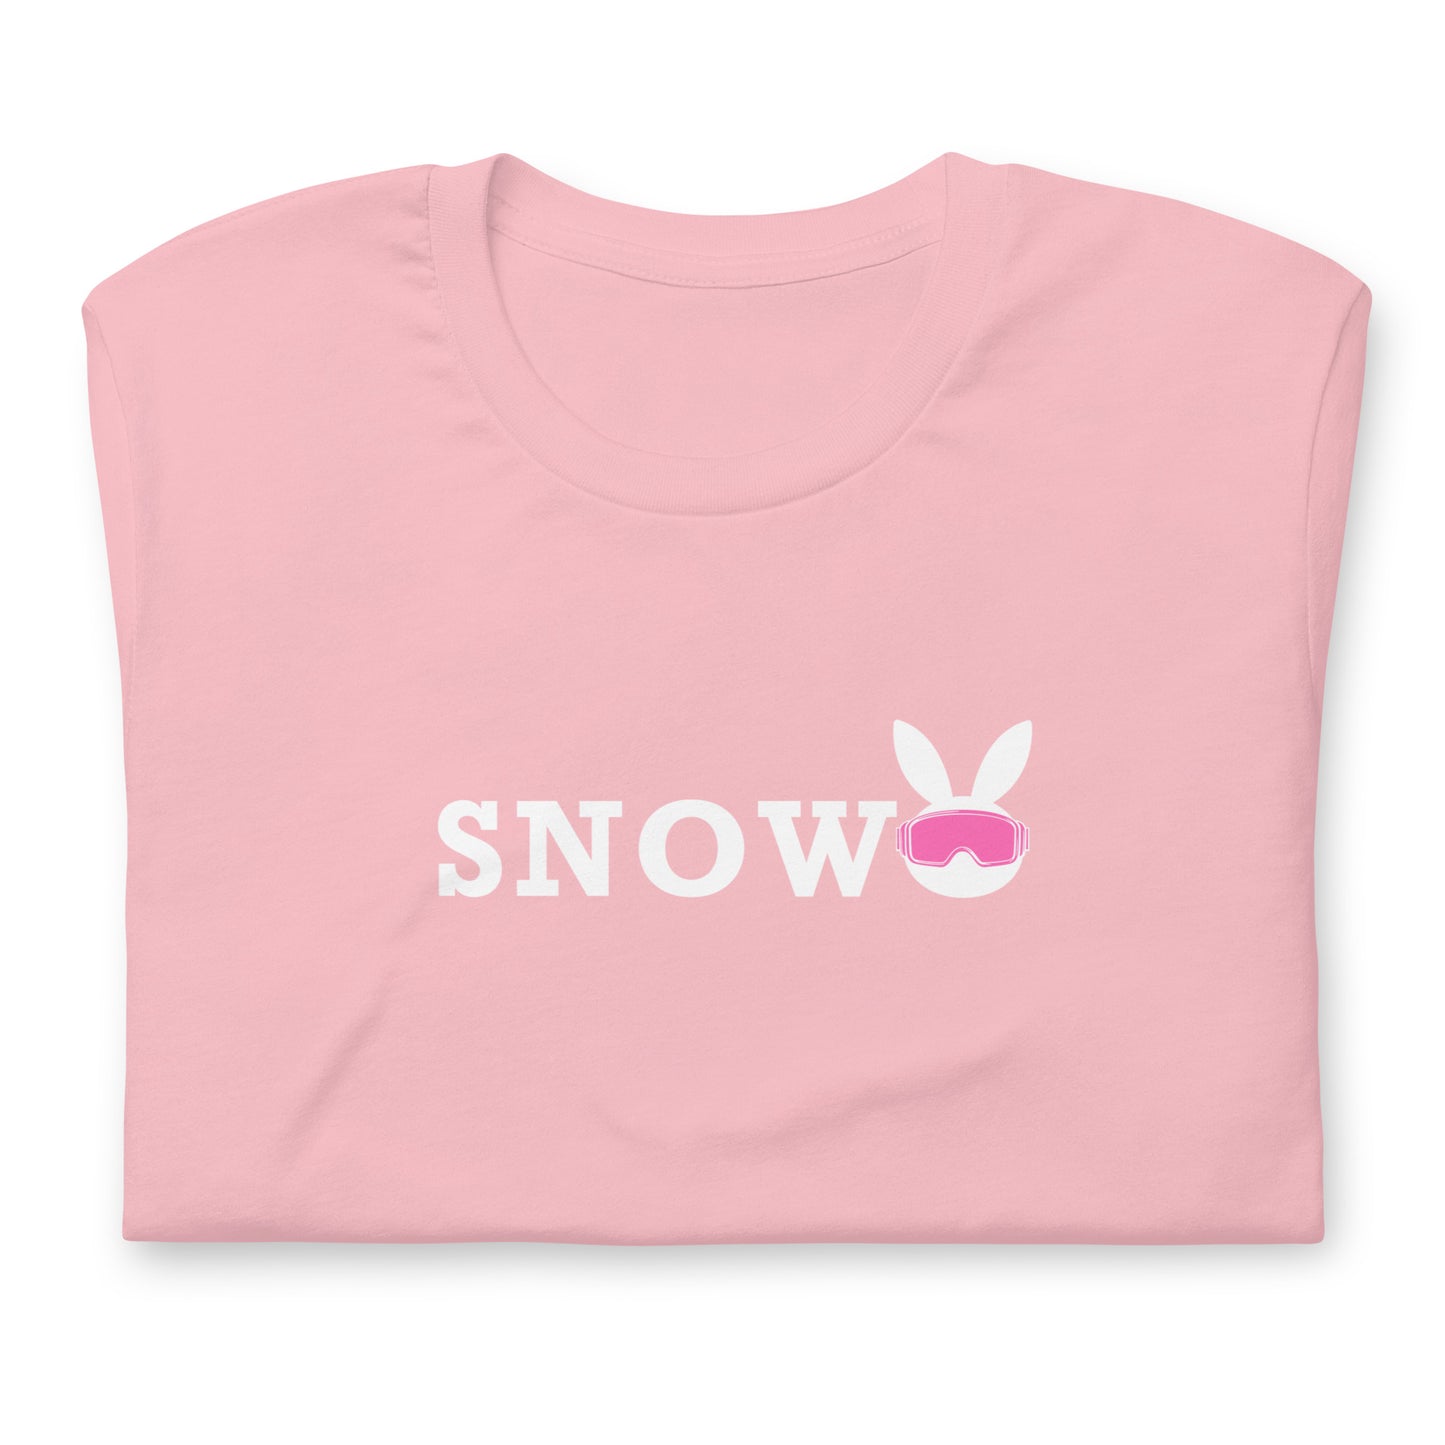 Snow Bunny Graphic Tee - Winter-Themed Fashionable T-Shirt